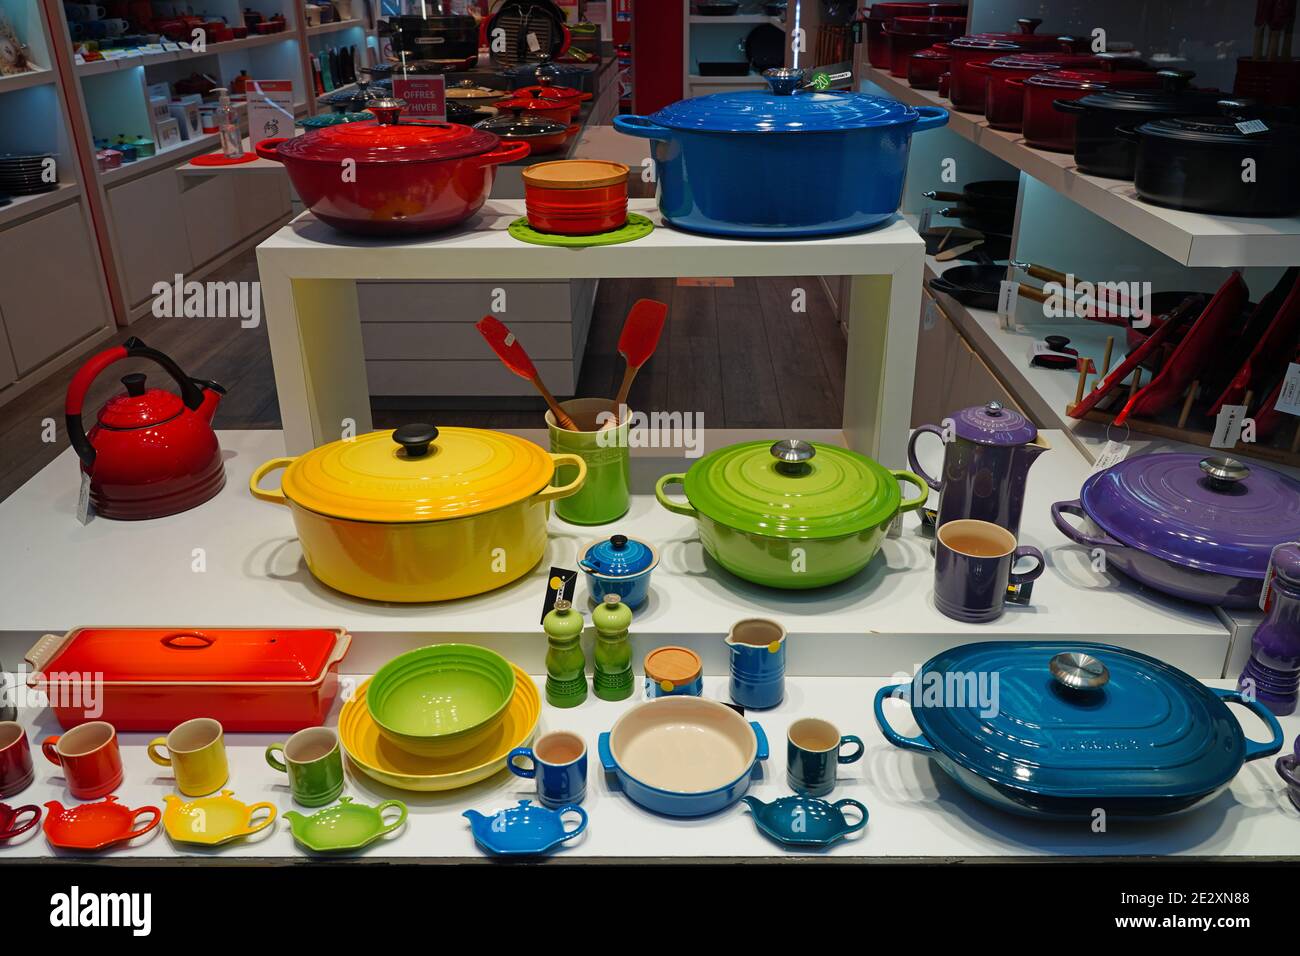 https://c8.alamy.com/comp/2E2XN88/paris-france-5-jan-2021-view-of-colorful-enameled-pots-and-pans-in-a-le-creuset-store-an-expensive-brand-of-french-kitchenware-2E2XN88.jpg